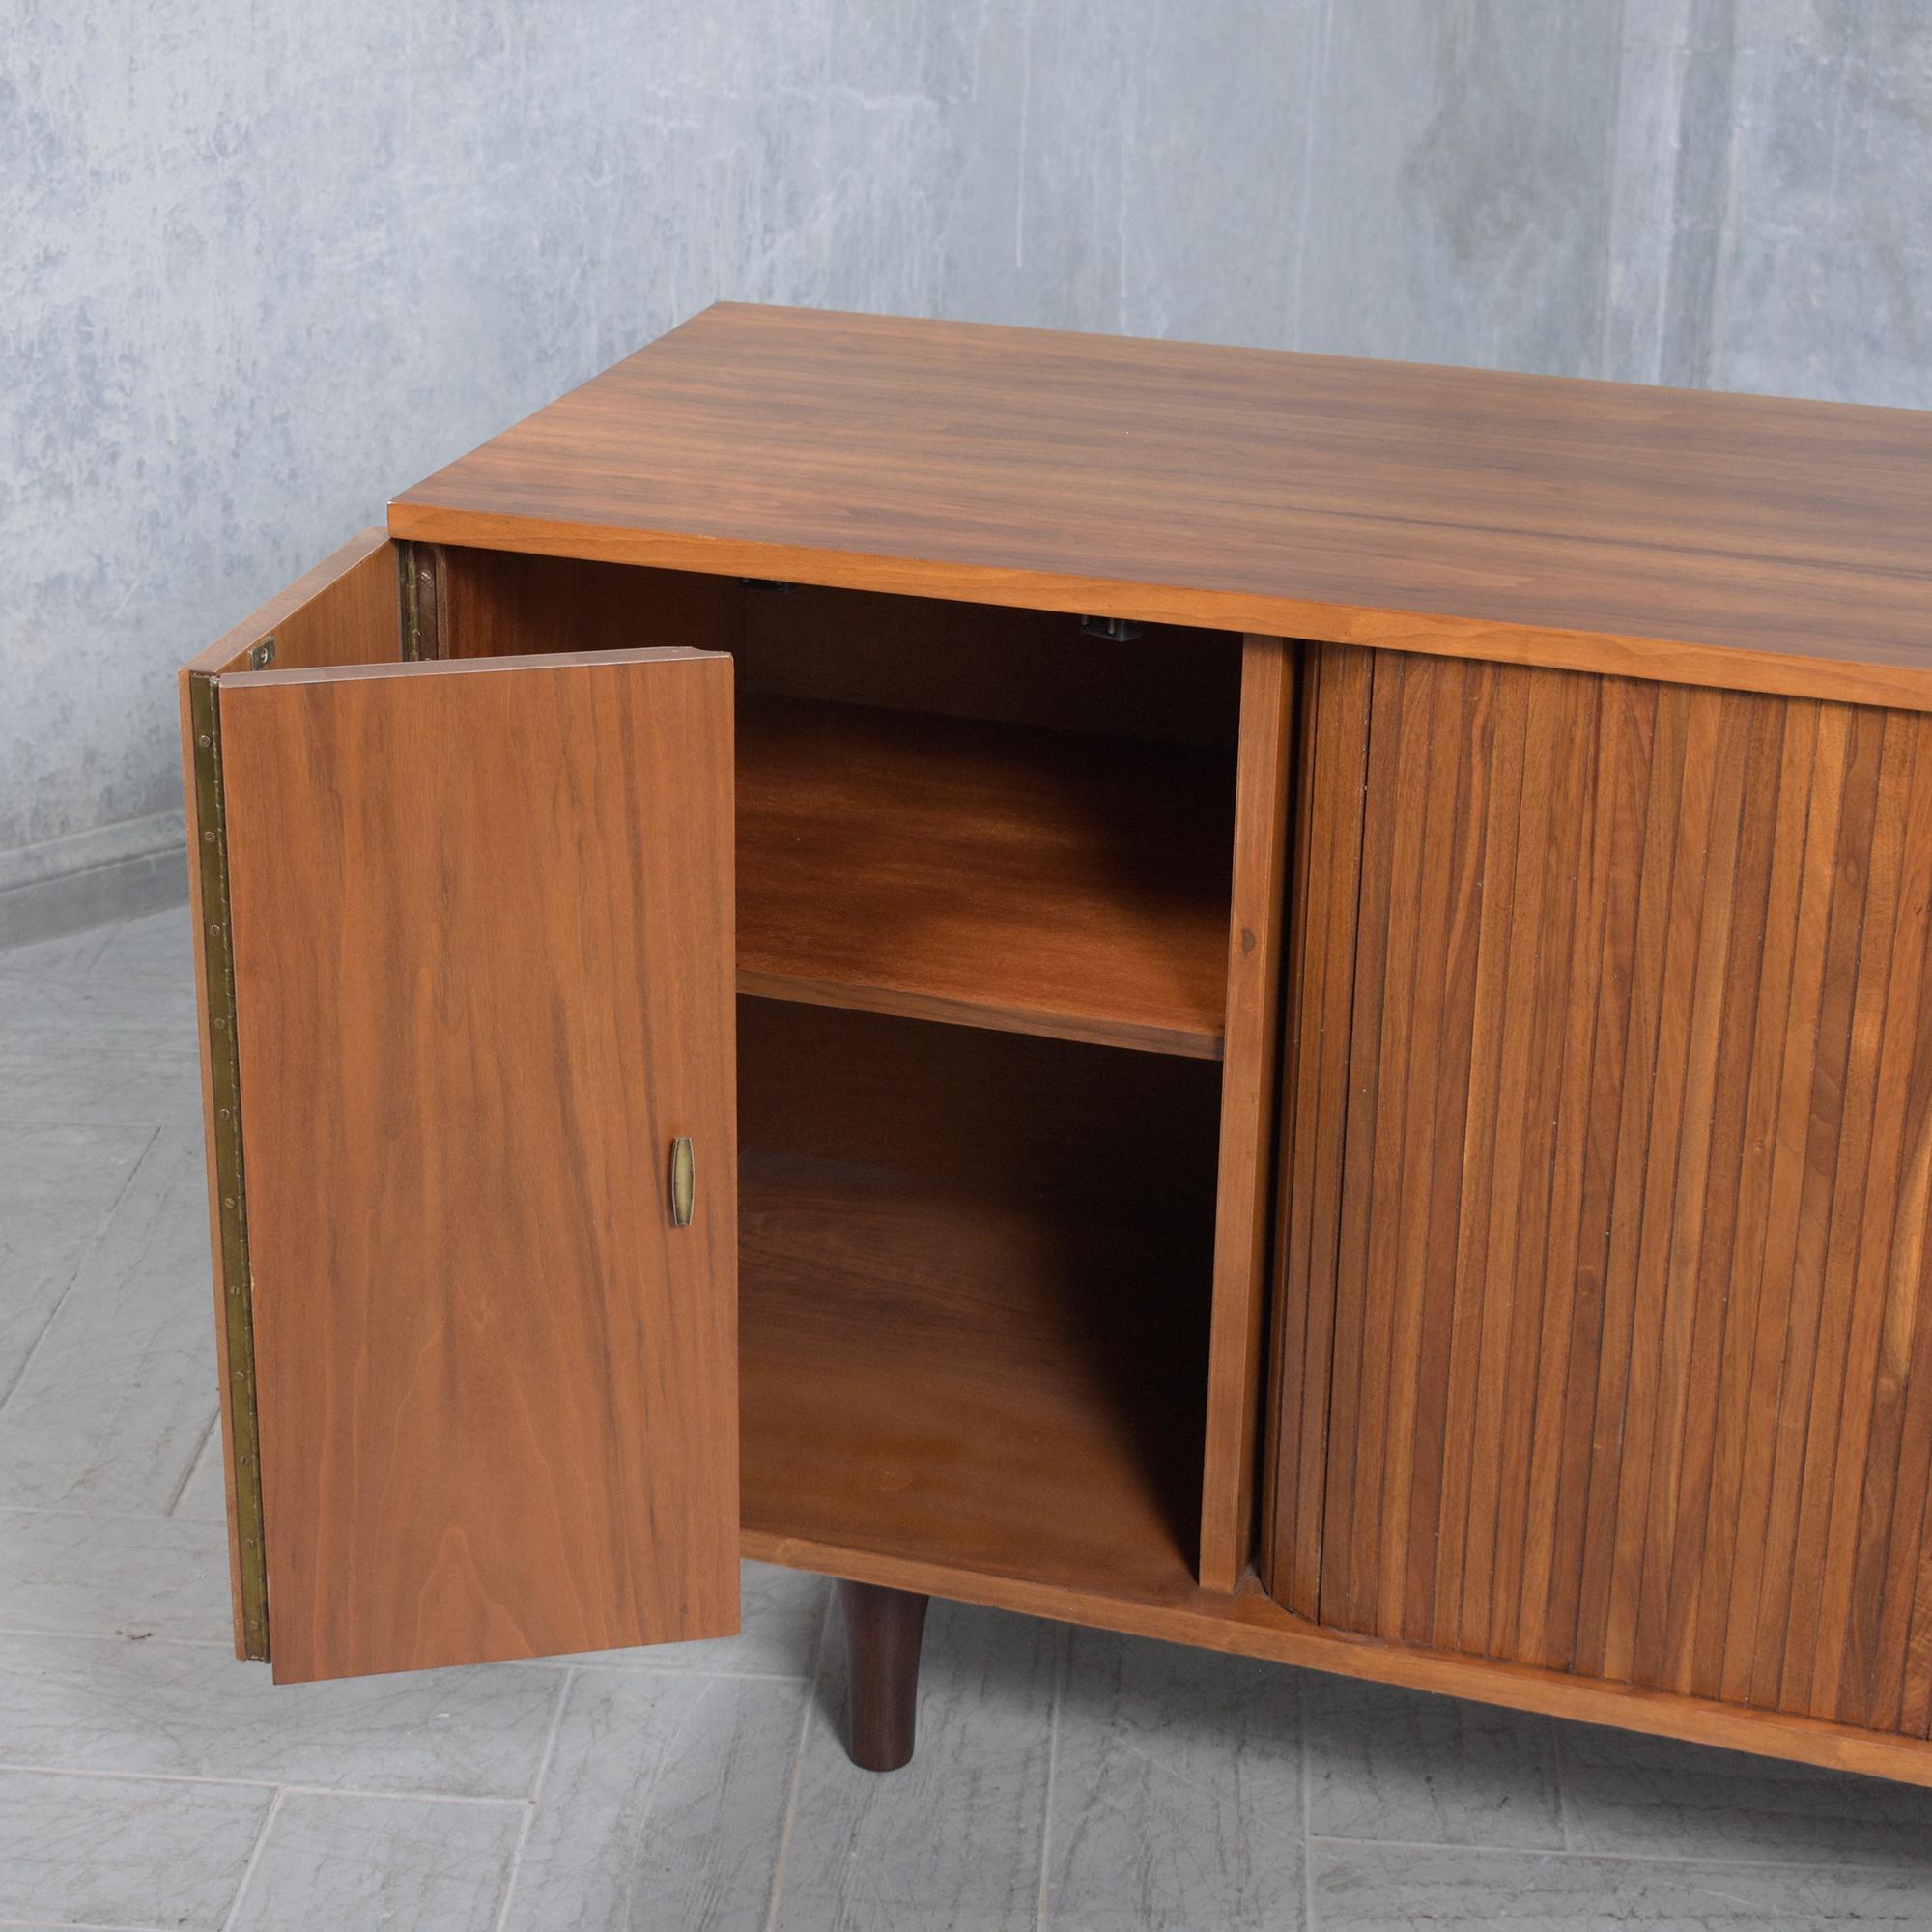 1960s Mid-Century Modern Walnut Credenza with Tambour Doors and Storage For Sale 1